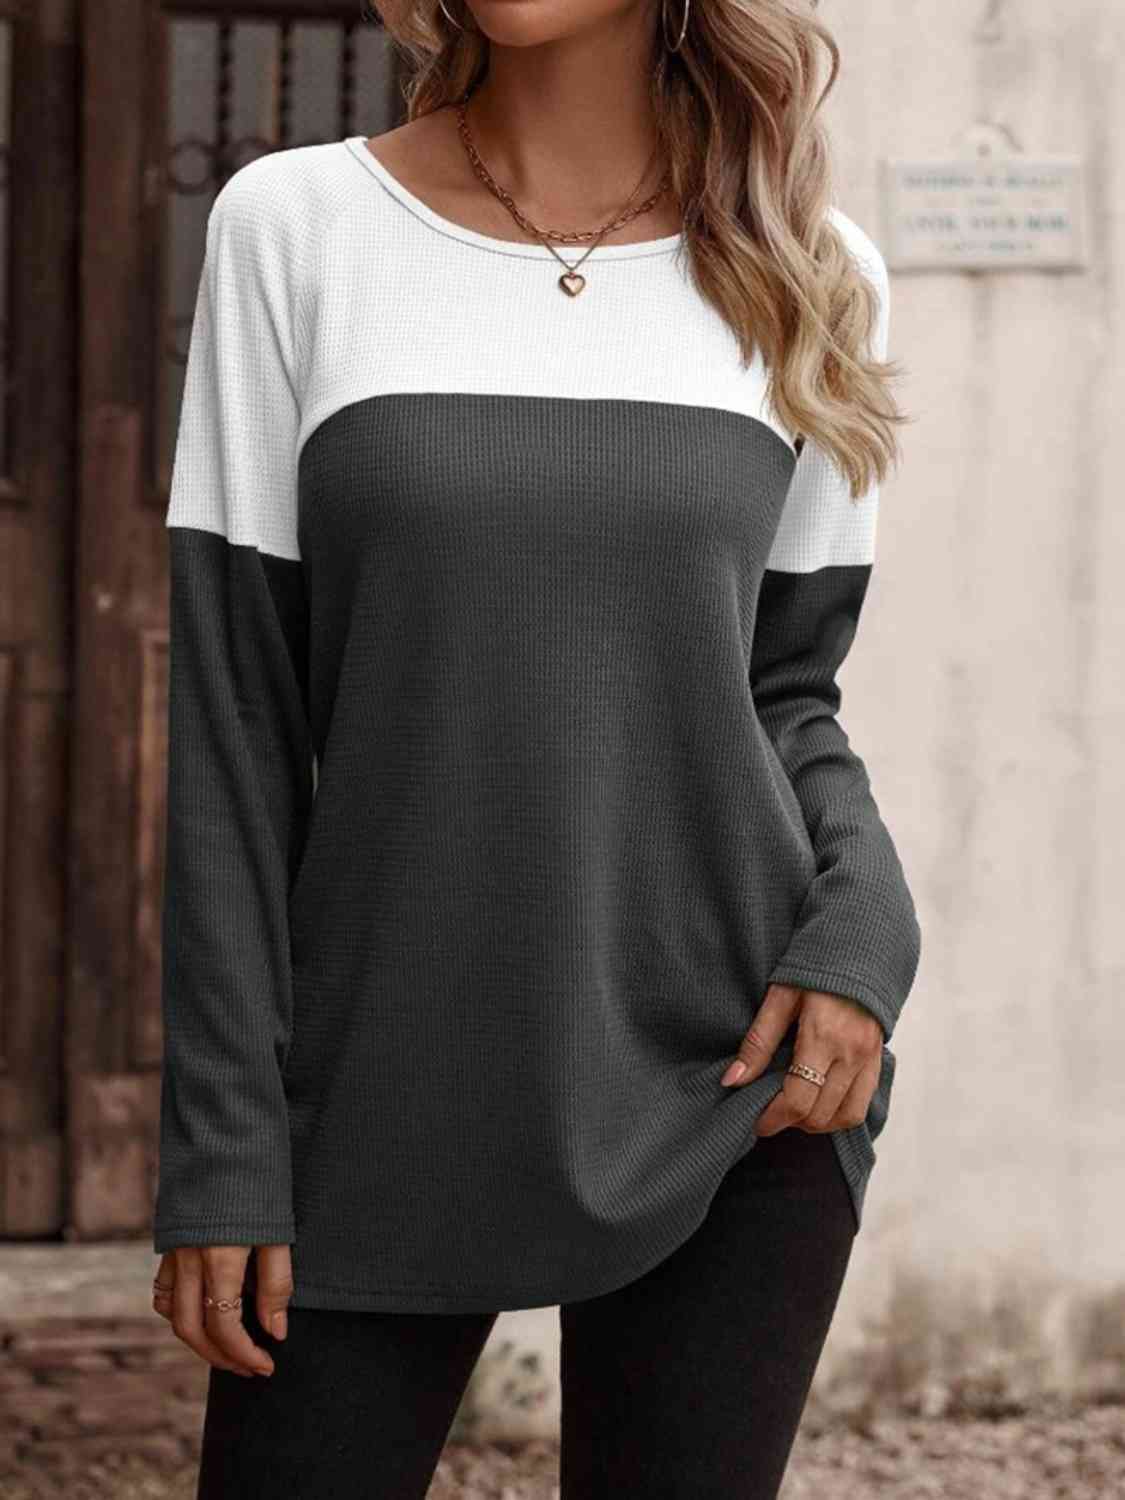 Contrast Round Neck Long Sleeve T-Shirt  Krazy Heart Designs Boutique Heather Gray S 